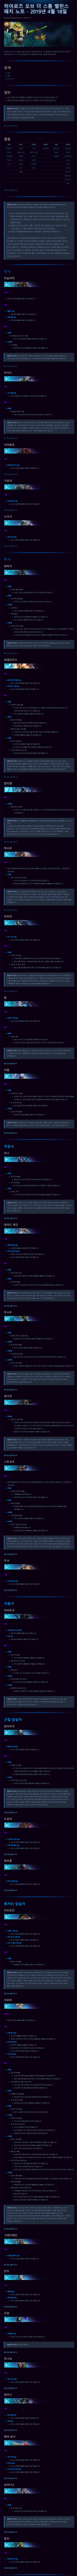 Live_Patch_Note_KR.png